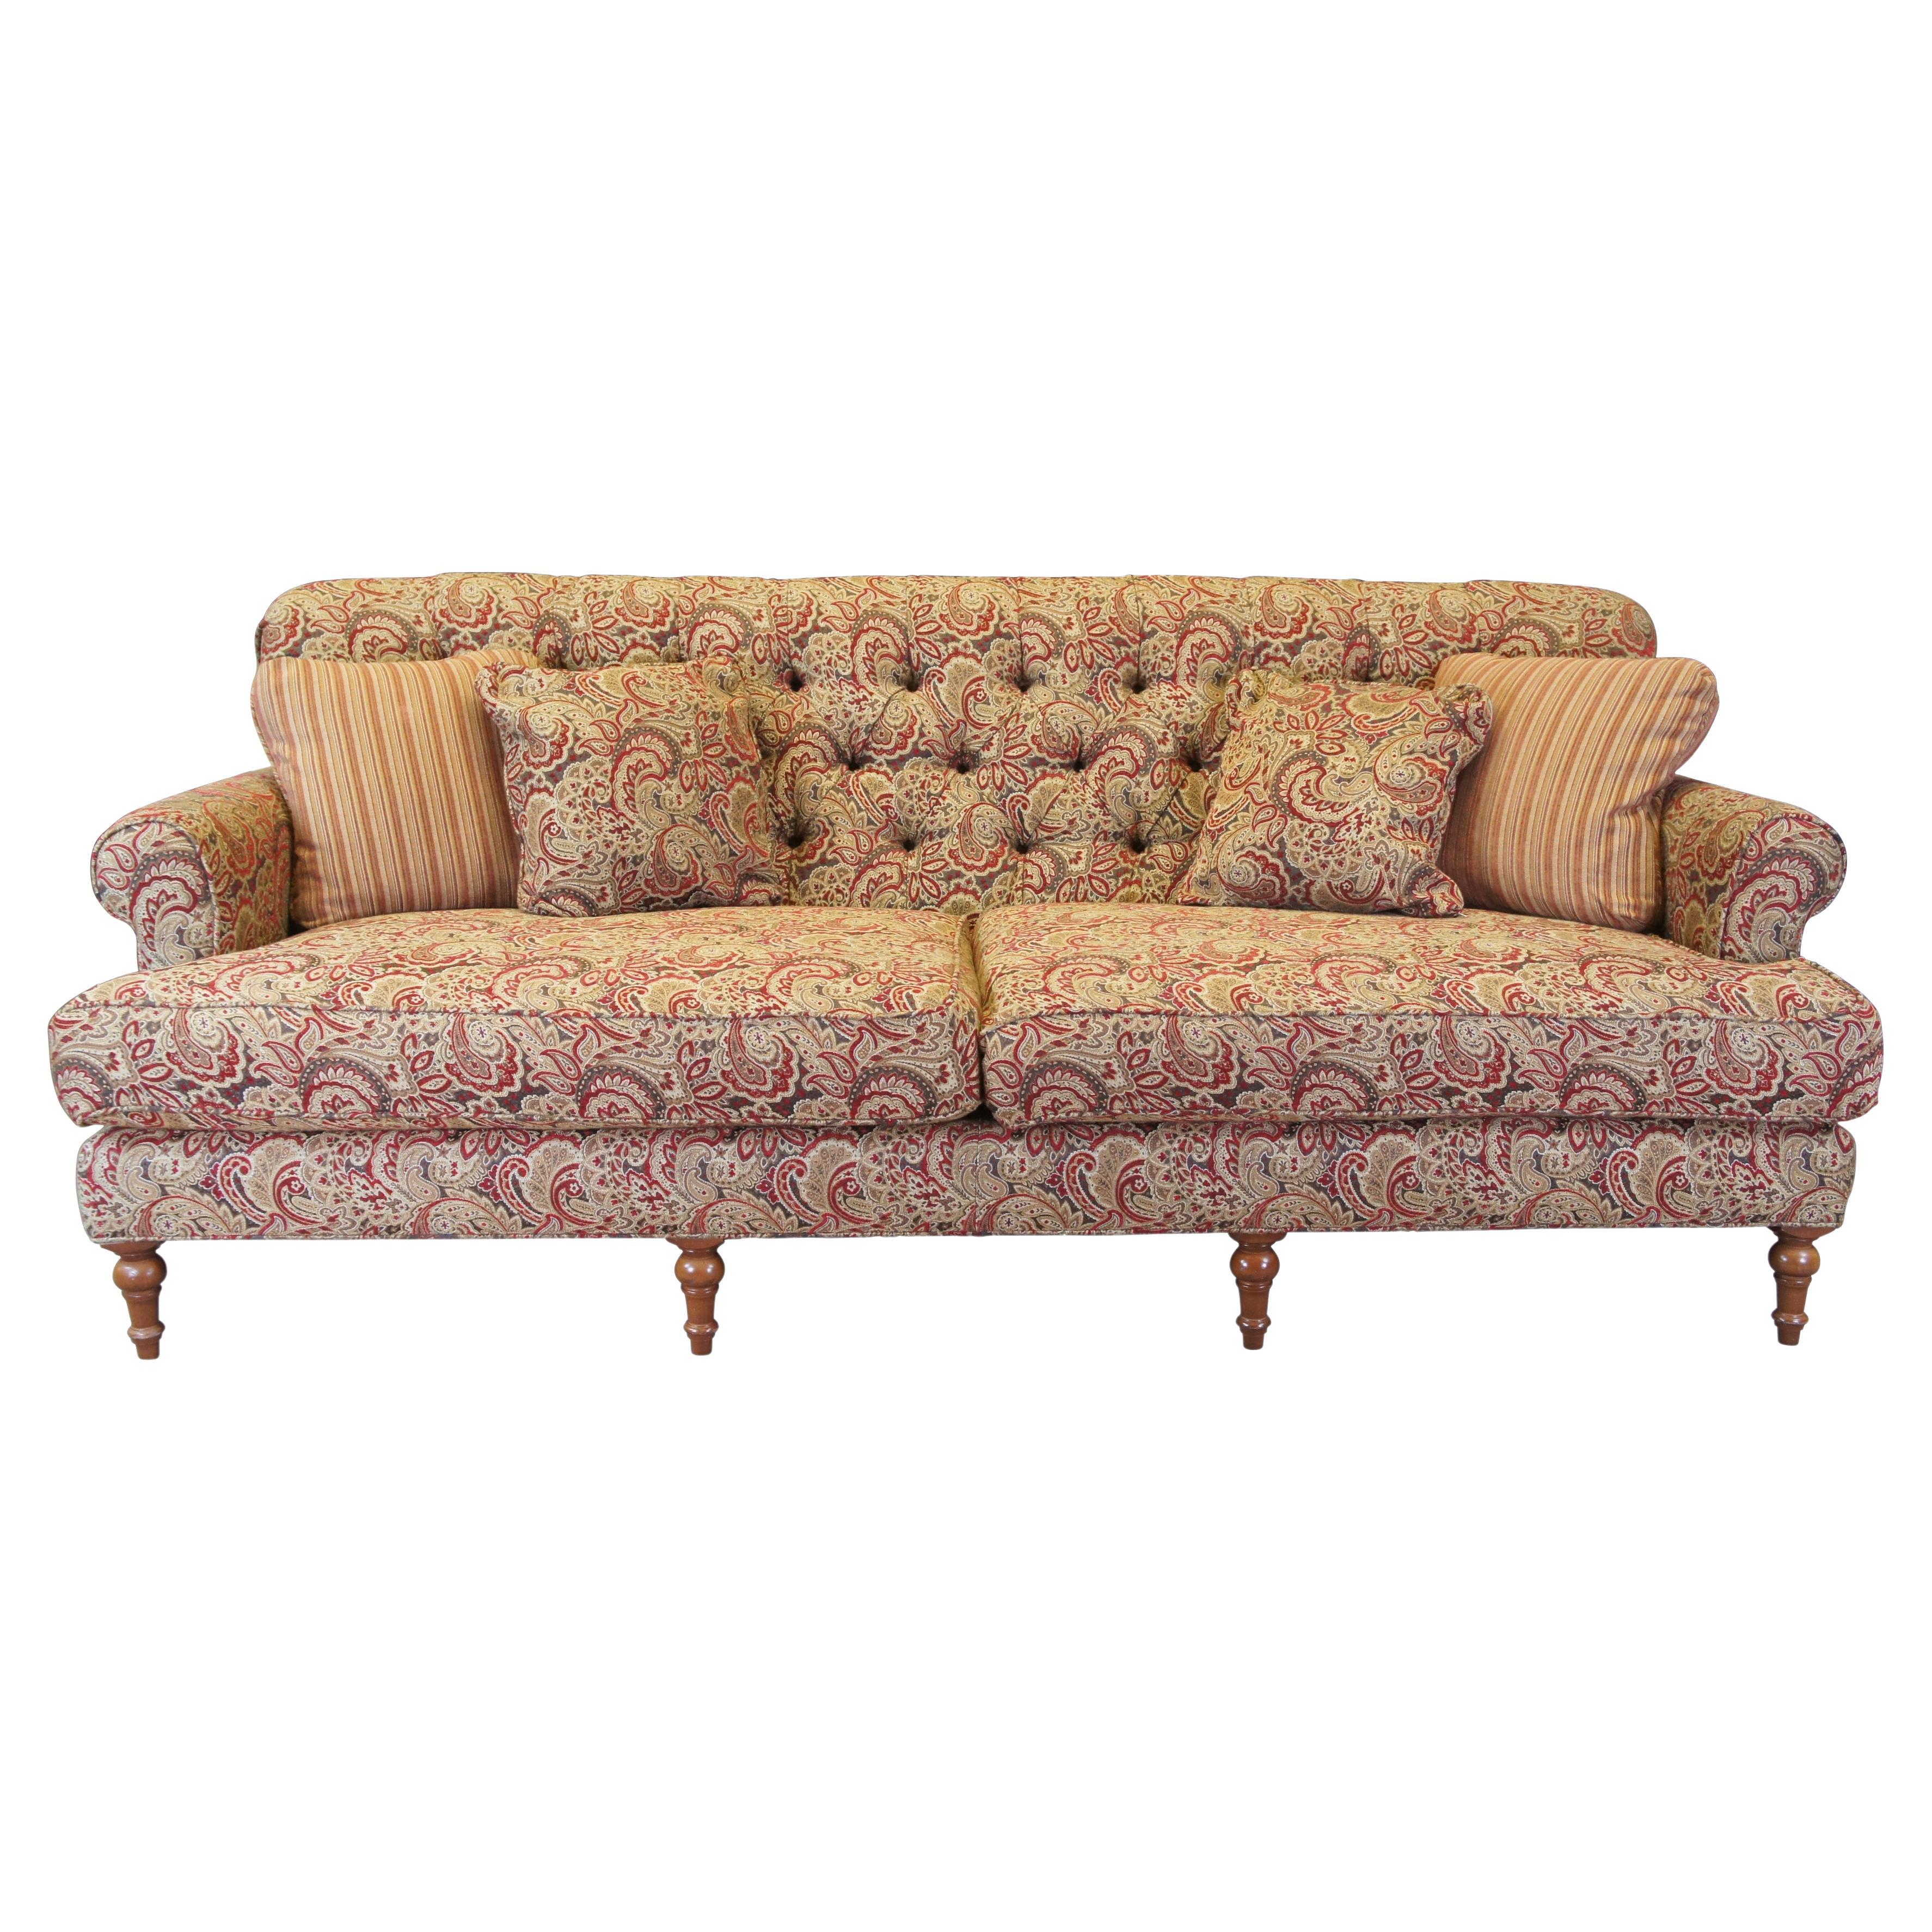 Vintage Arhaus Cambridge Collection Tufted Paisley Upholstered Sofa Couch 97 For Sale